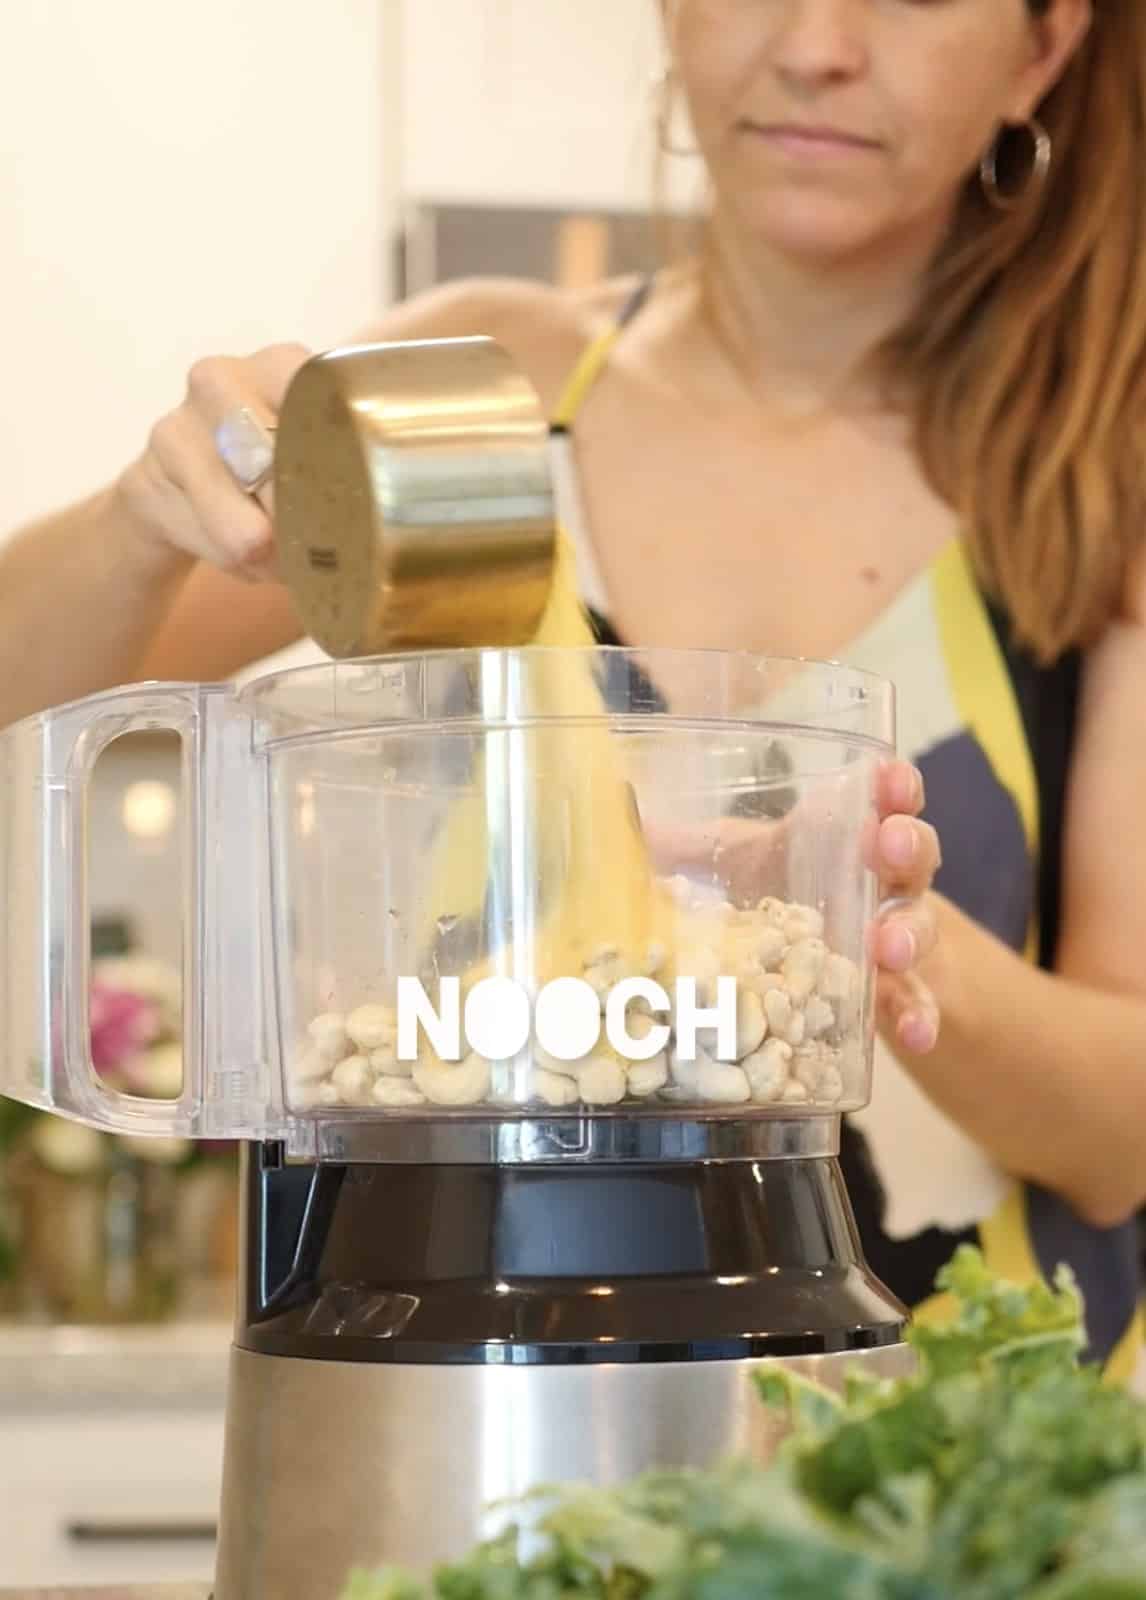 Pouring nutritional yeast into the food processor.